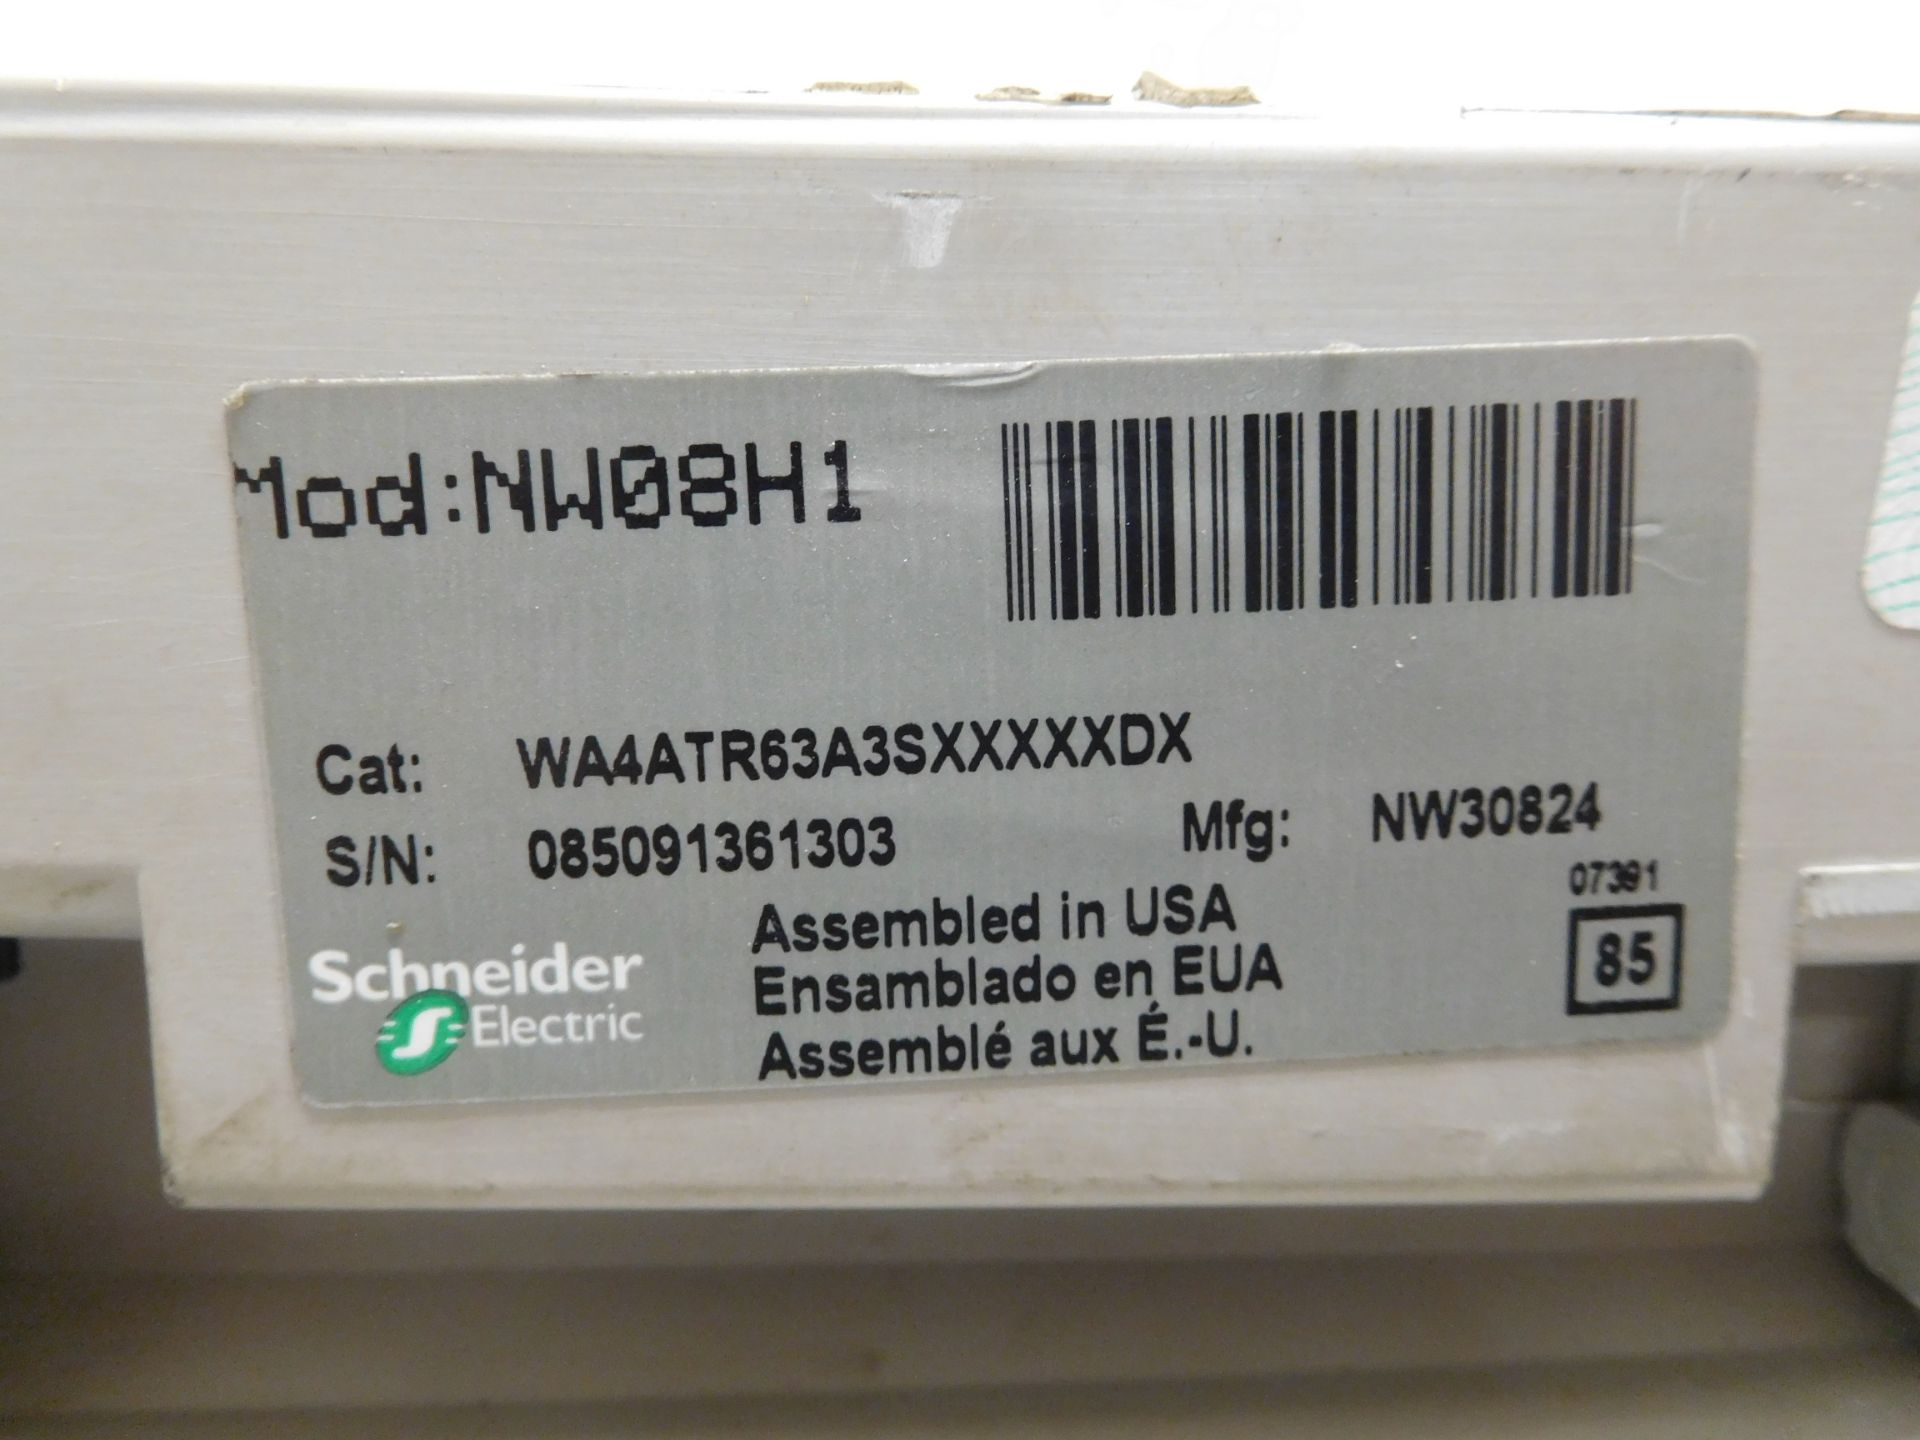 Square D NW 08 H1 Masterpact 800 Amp Low-Voltage Power Circuit Breaker - Image 3 of 7